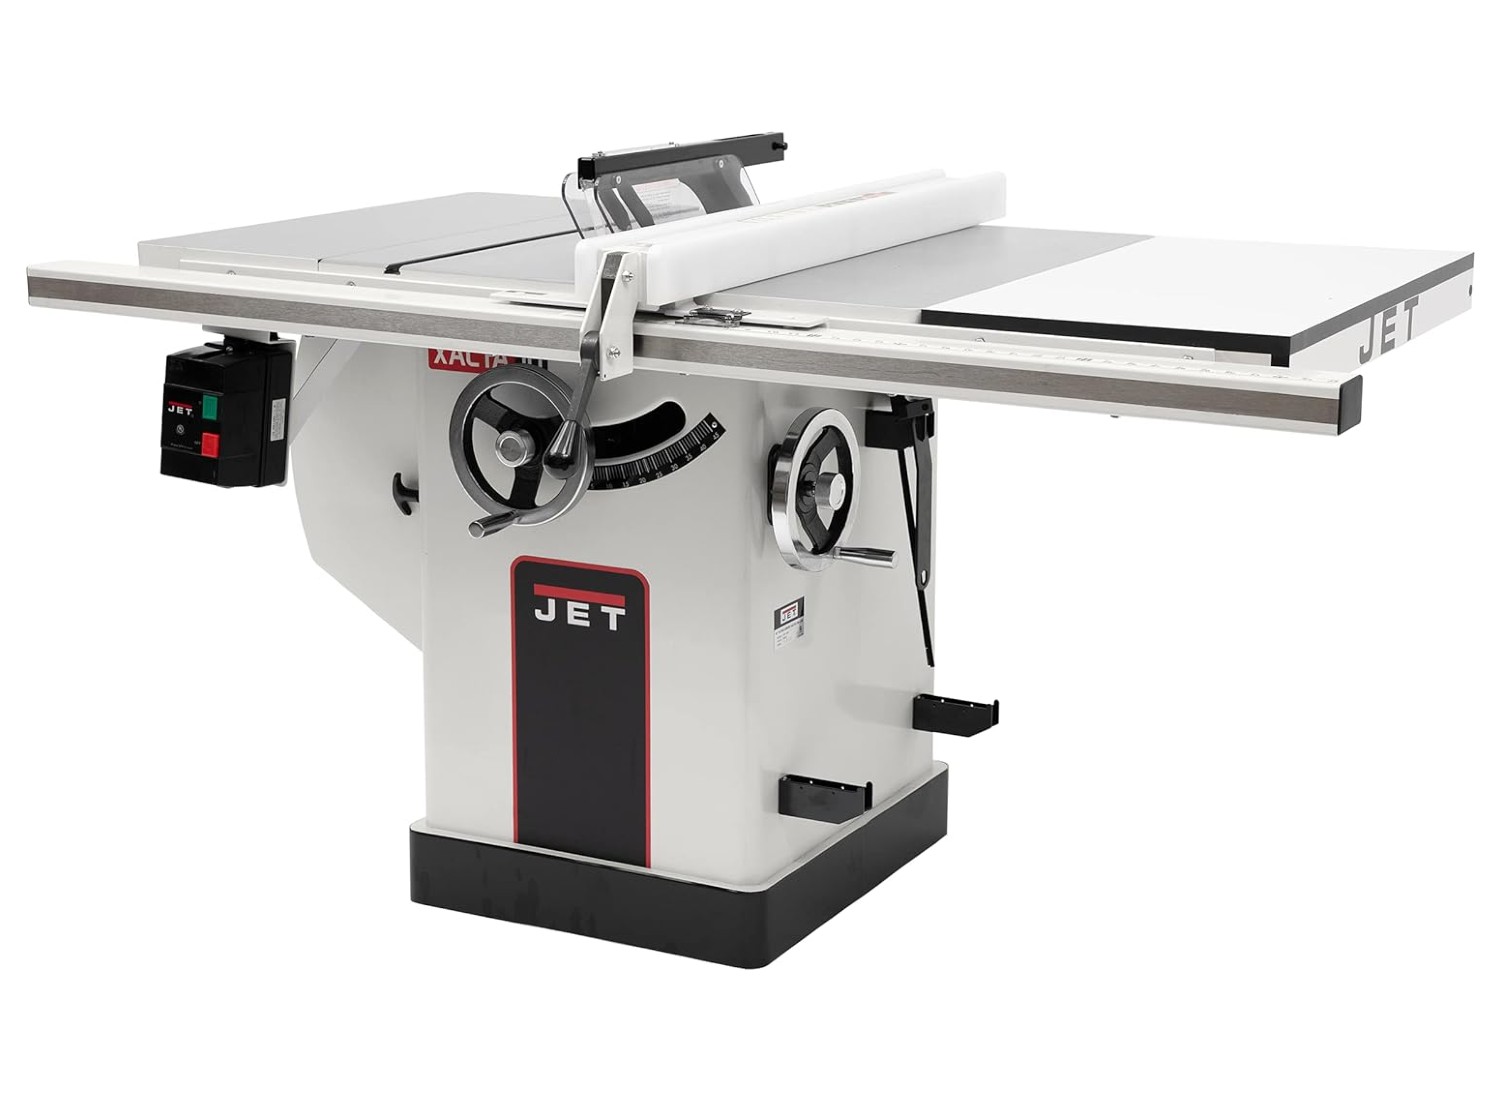 Front-facing image of a white and black Jet cabinet table saw.